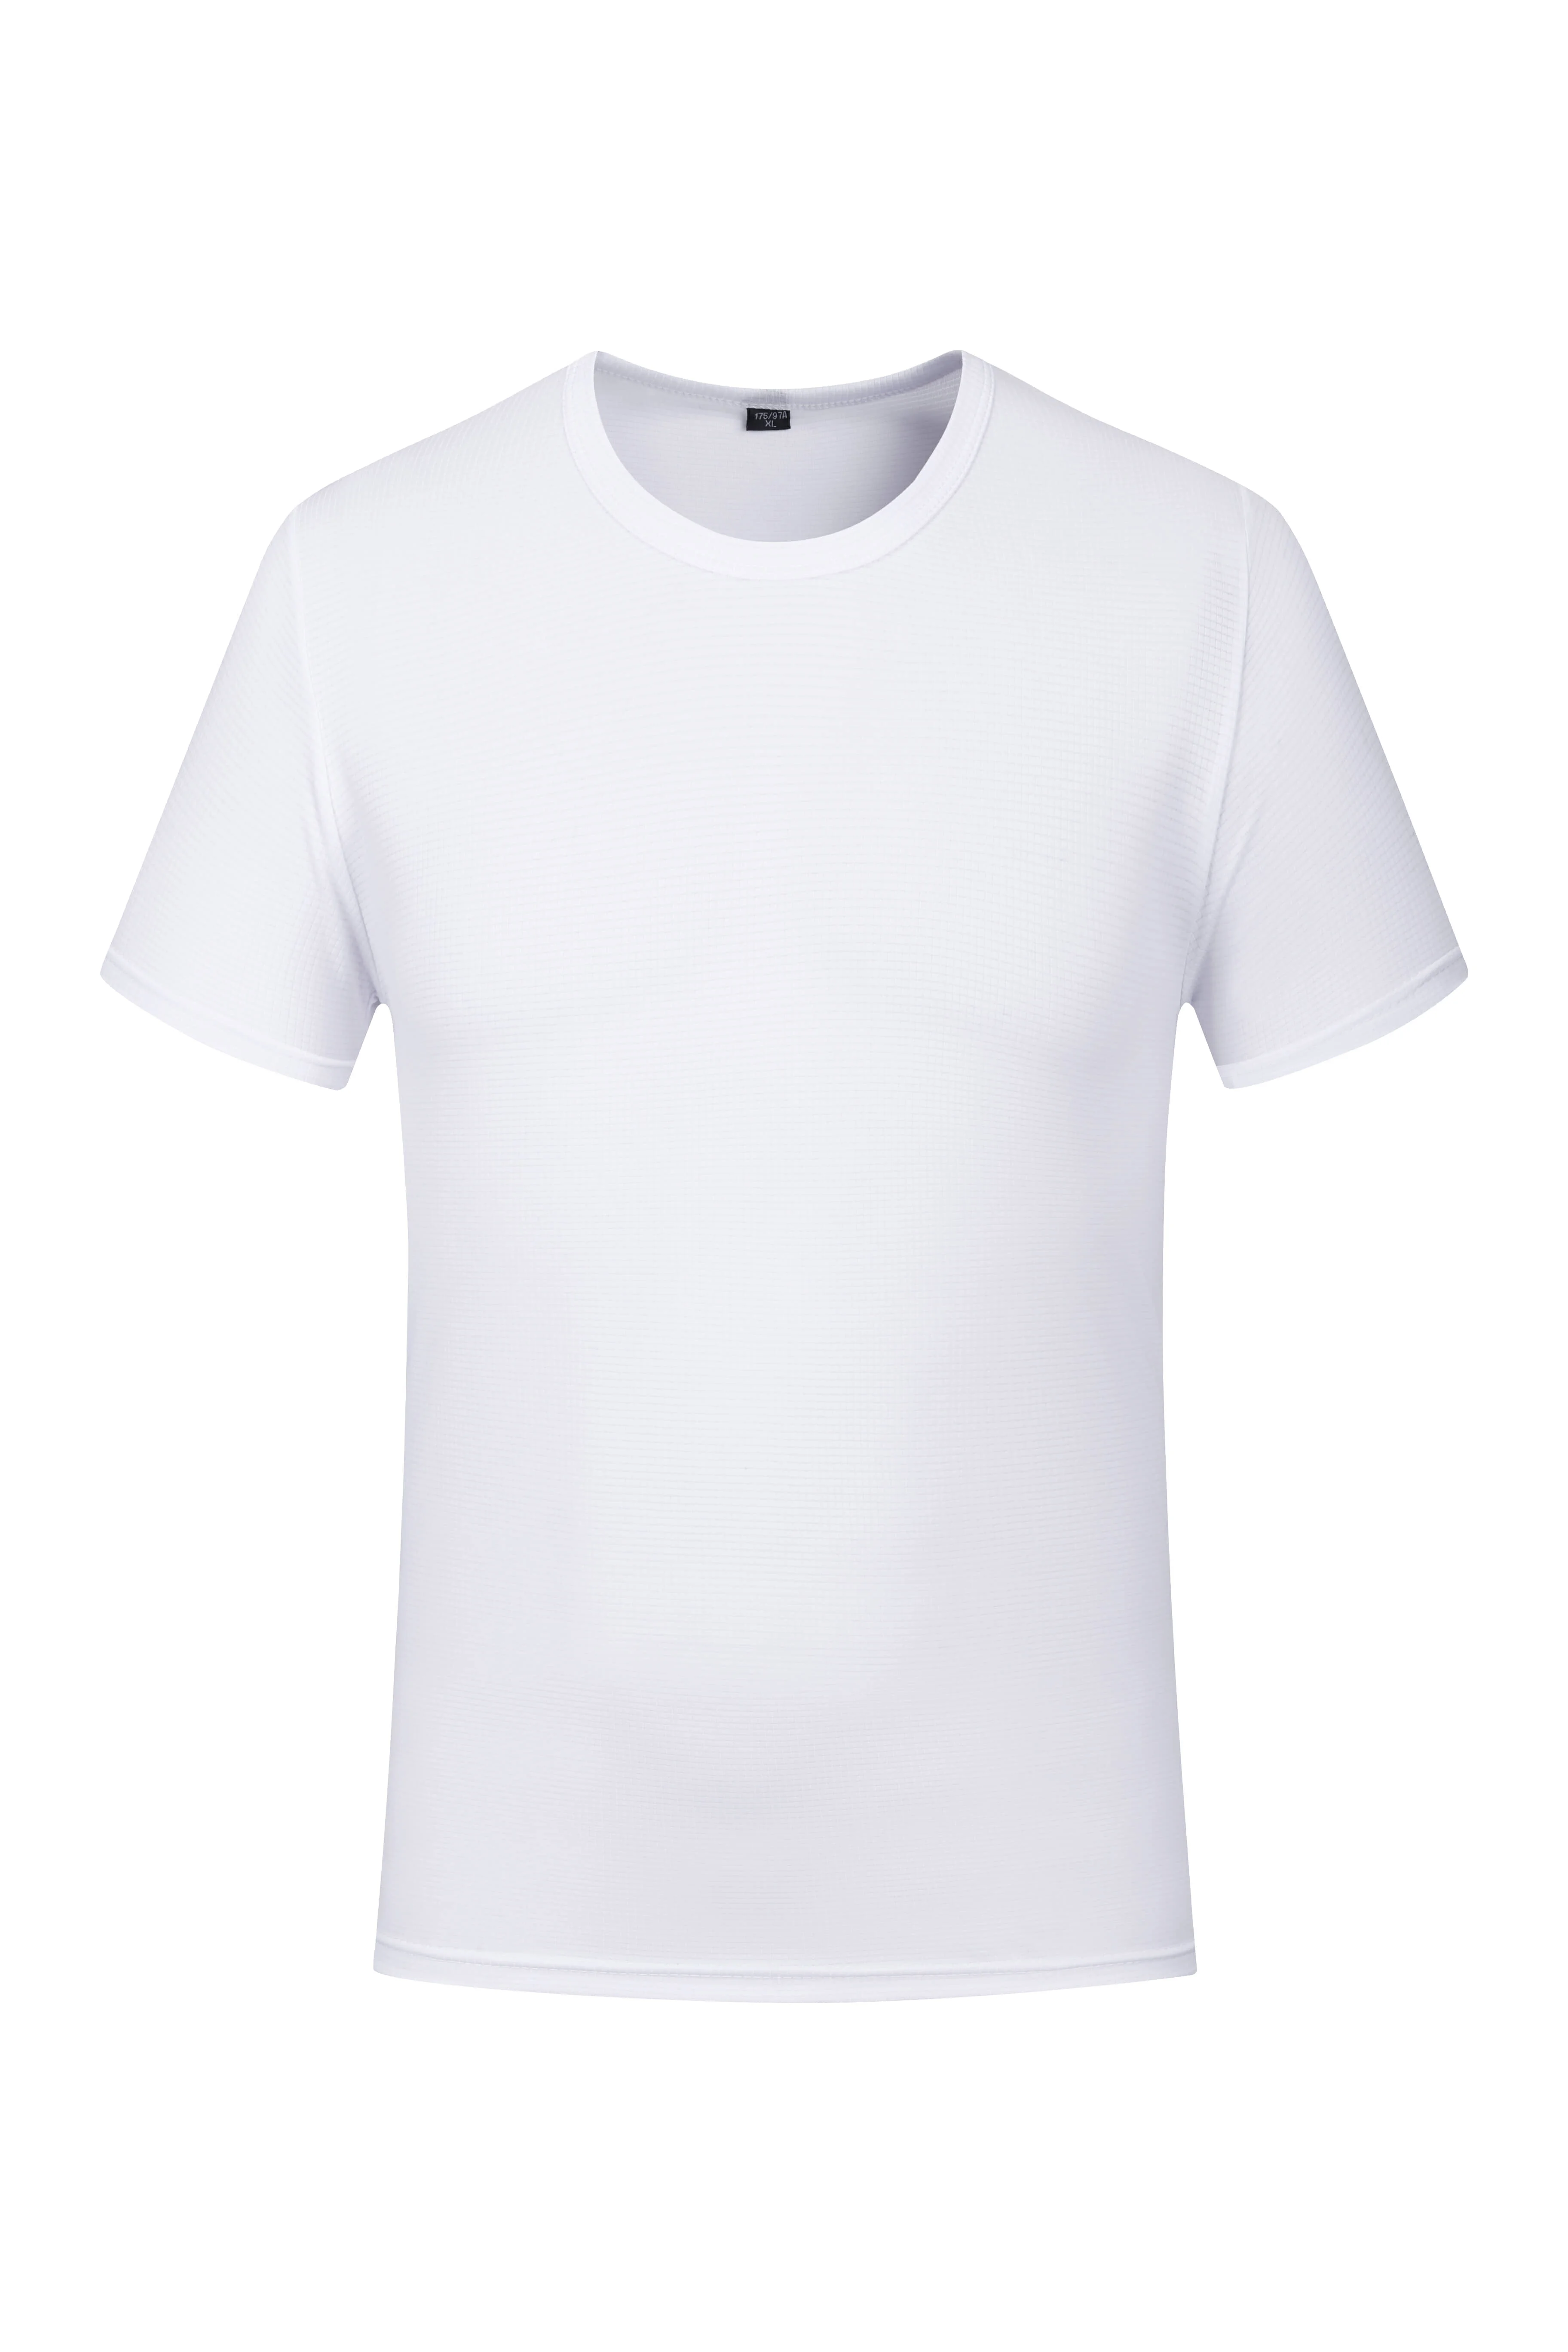 Quick Drying Polyester T Shirts For Sublimation Print Logo O-neck Plain